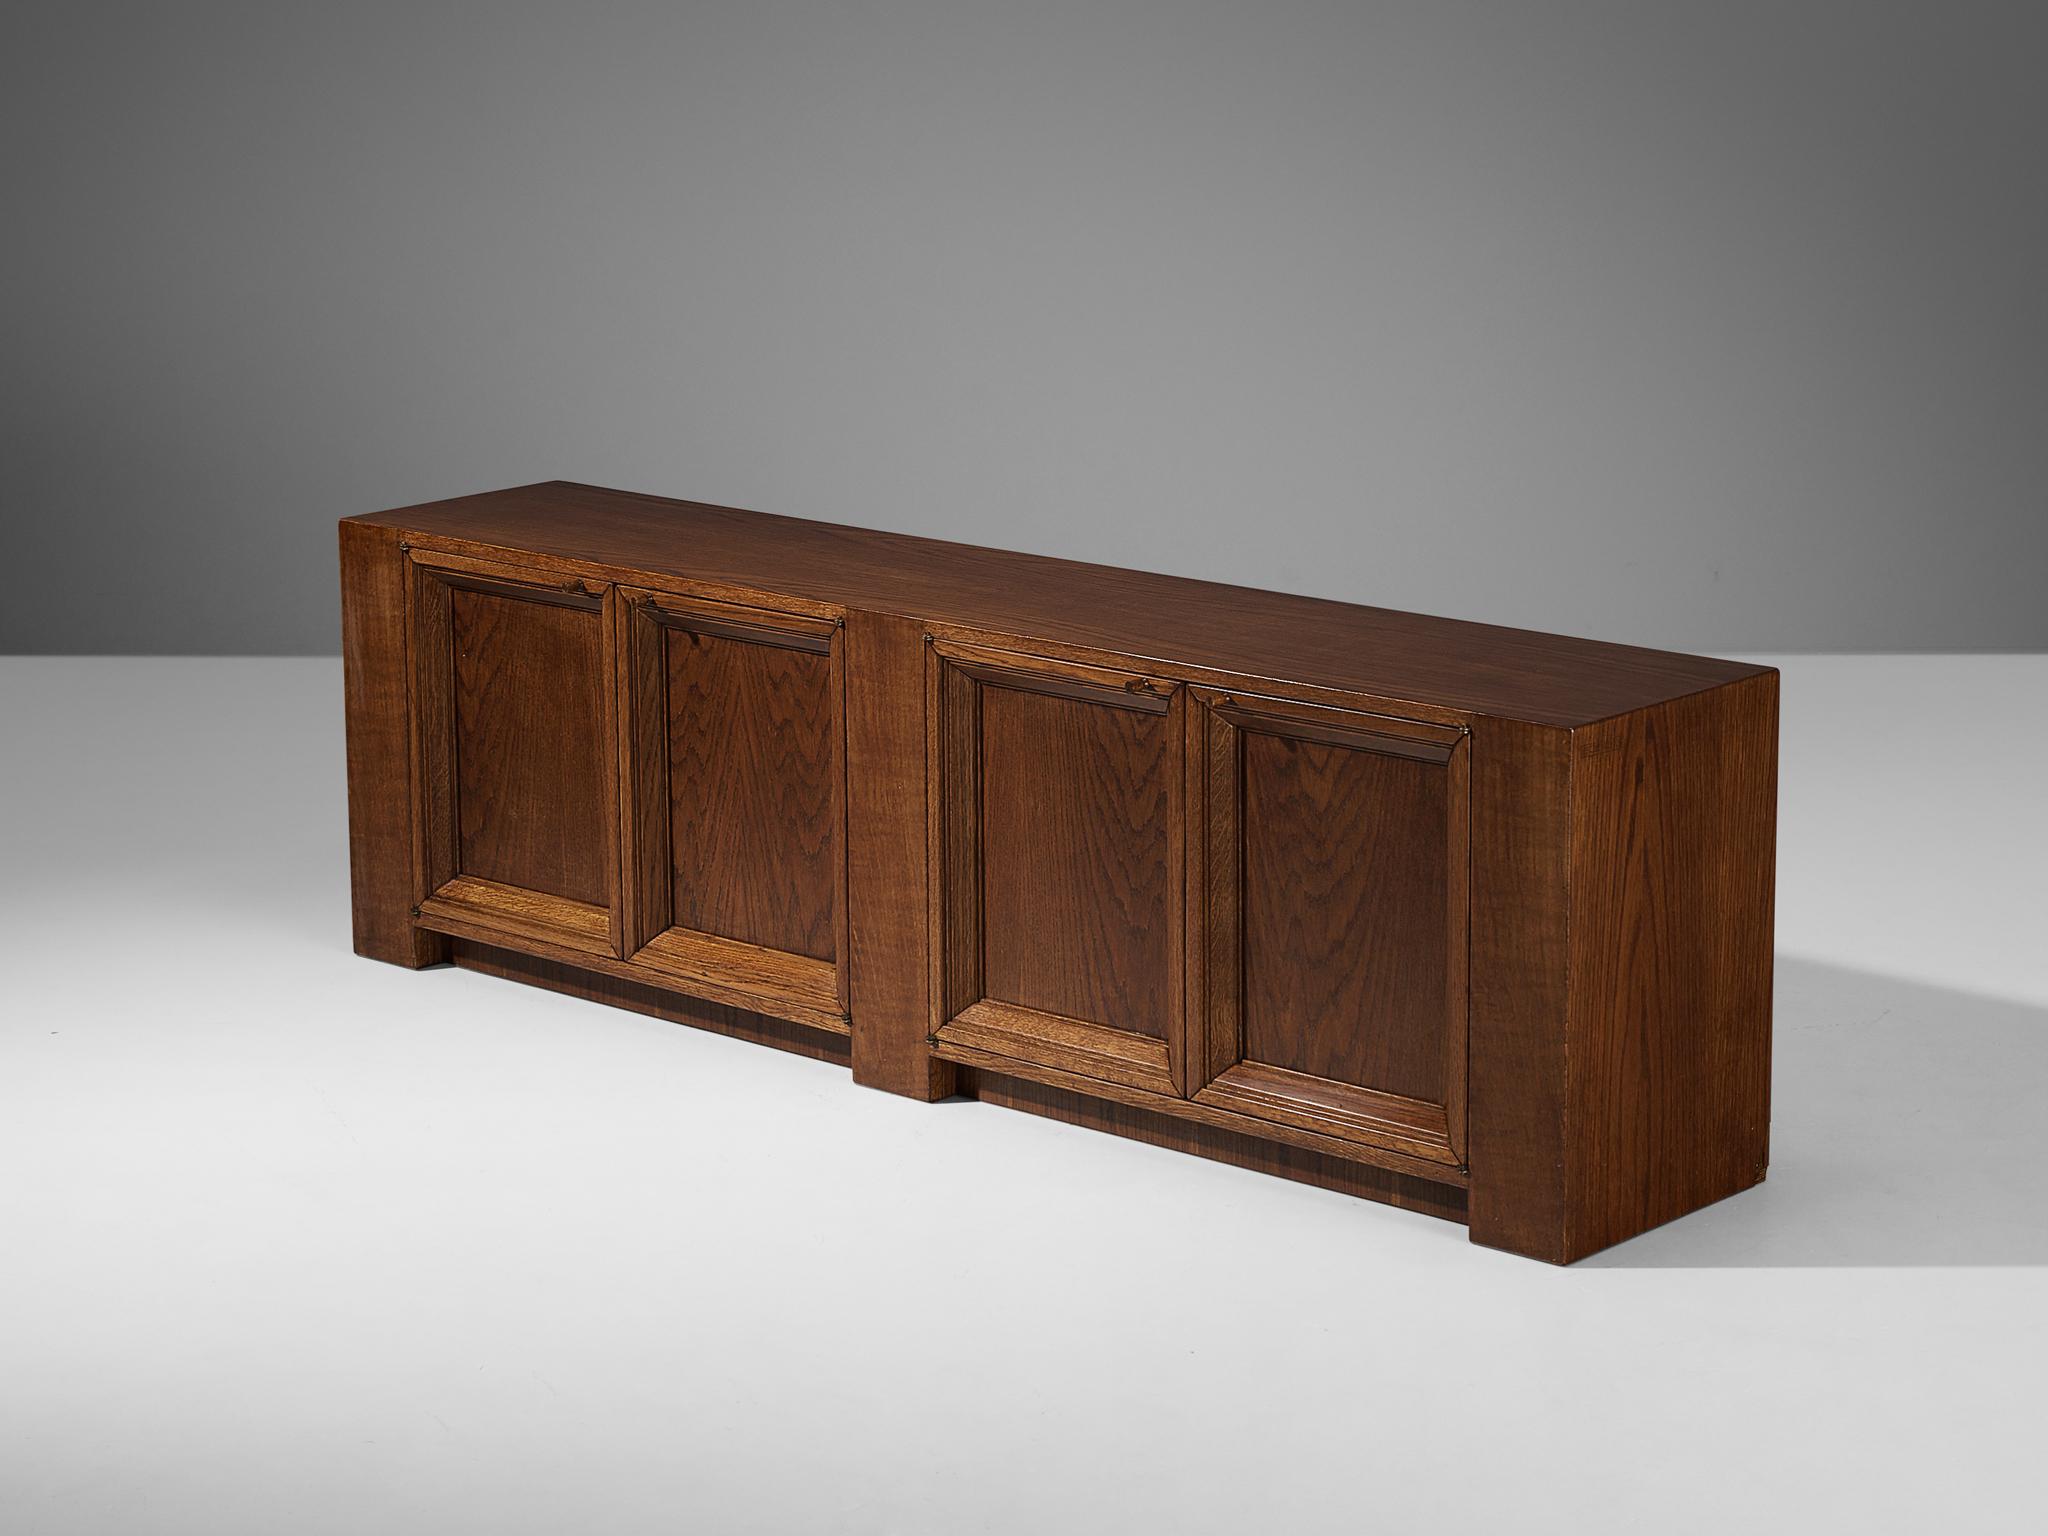 Giuseppe Rivadossi for Officina Rivadossi, sideboard, oak, Italy, 1980s

Giuseppe Rivadossi once again proves his great eye for materialization and technicality that this design is exemplary for. The sideboard is constructed using wooden panels